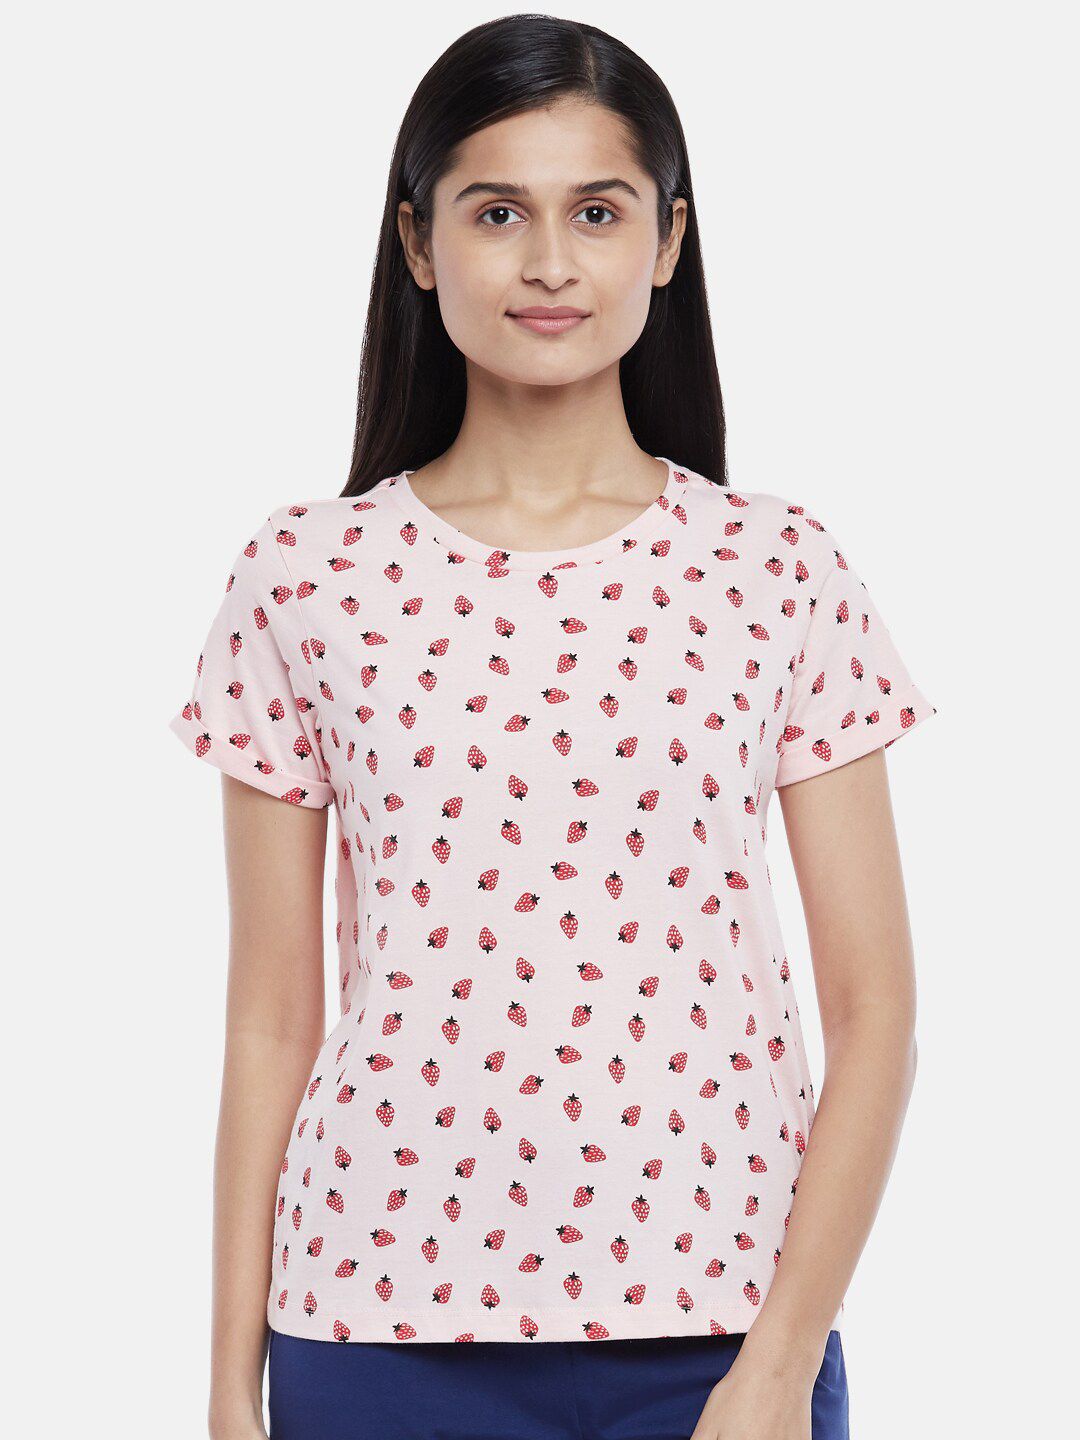 Dreamz by Pantaloons Pink & Red Round Neck Conversational Printed Cotton Regular Lounge tshirt Price in India